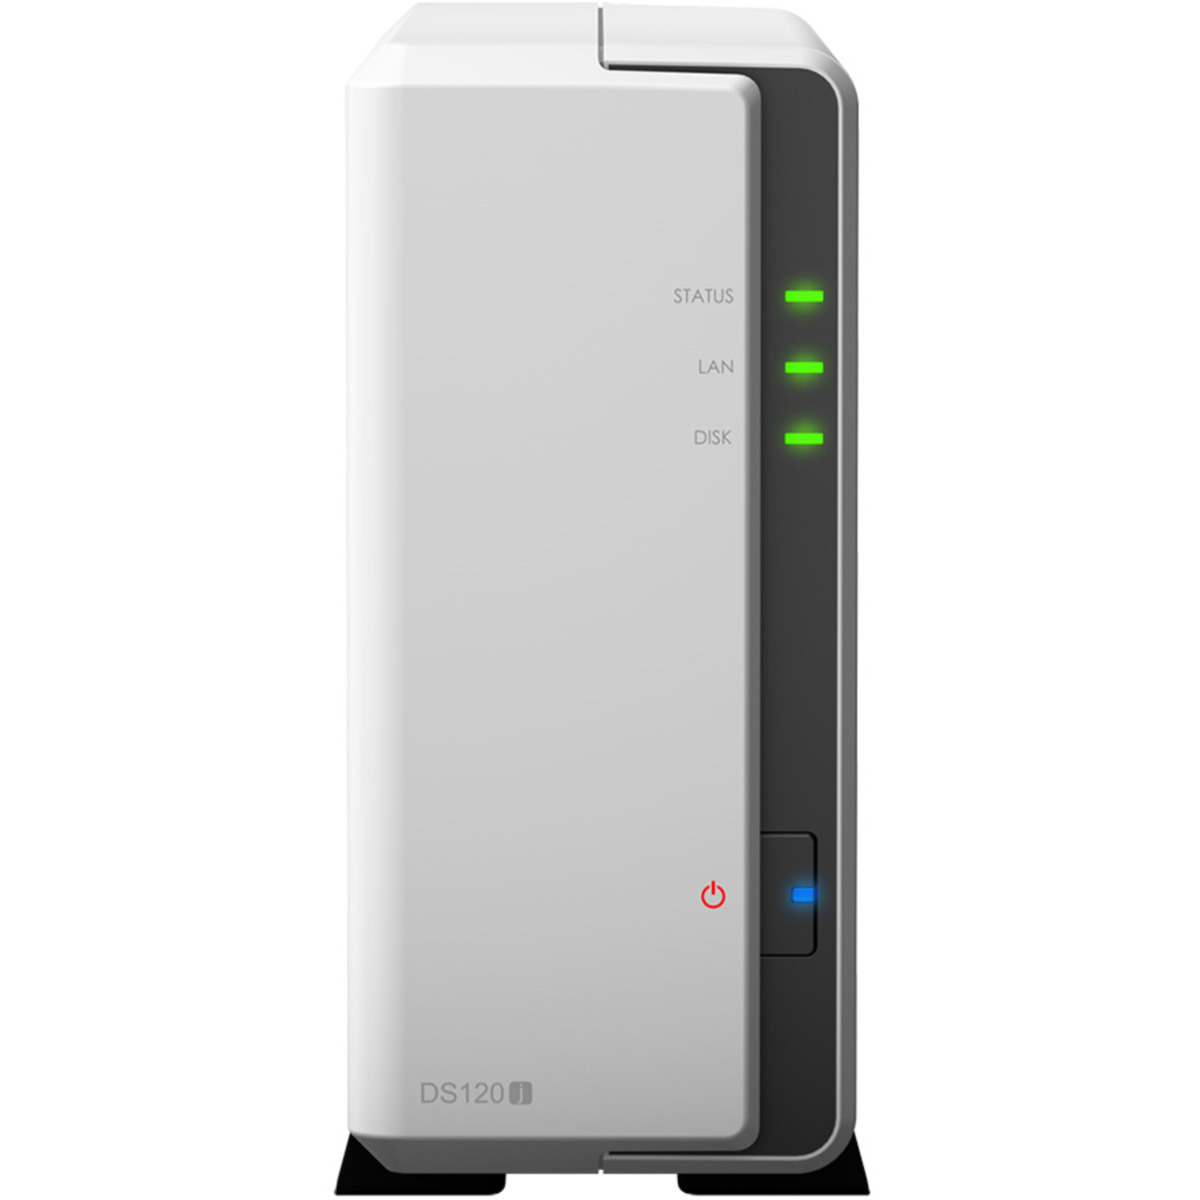 buy Synology DiskStation DS120j 22tb Desktop NAS - Network Attached Storage Device 1x22000gb Western Digital Ultrastar HC570 WUH722222ALE6L4 3.5 7200rpm SATA 6Gb/s HDD ENTERPRISE Class Drives Installed - Burn-In Tested - nas headquarters buy network attached storage server device das new raid-5 free shipping simply usa DiskStation DS120j